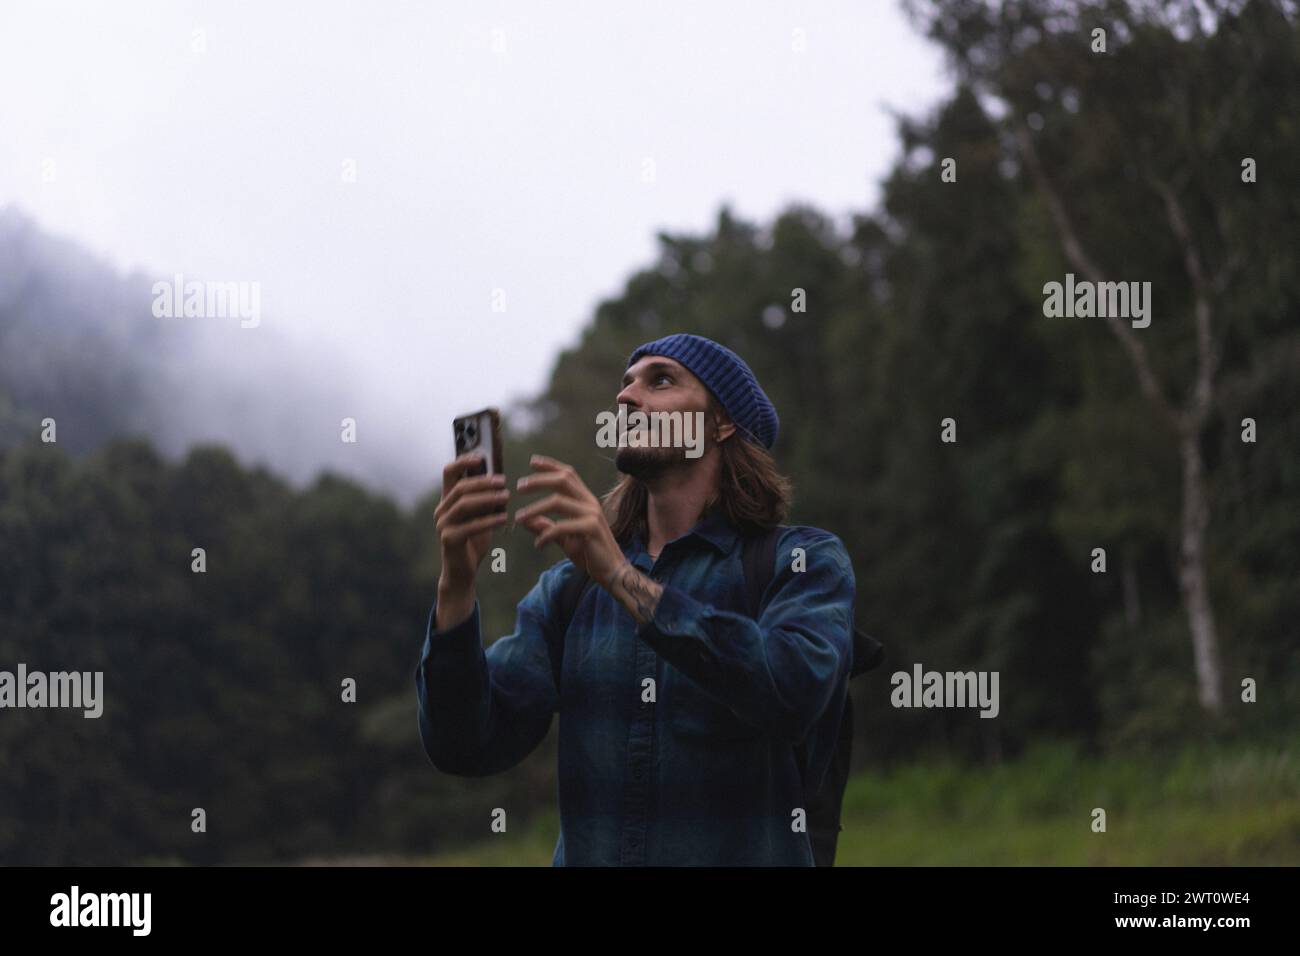 A man traveler in the rainforest takes pictures on his phone. Stock Photo